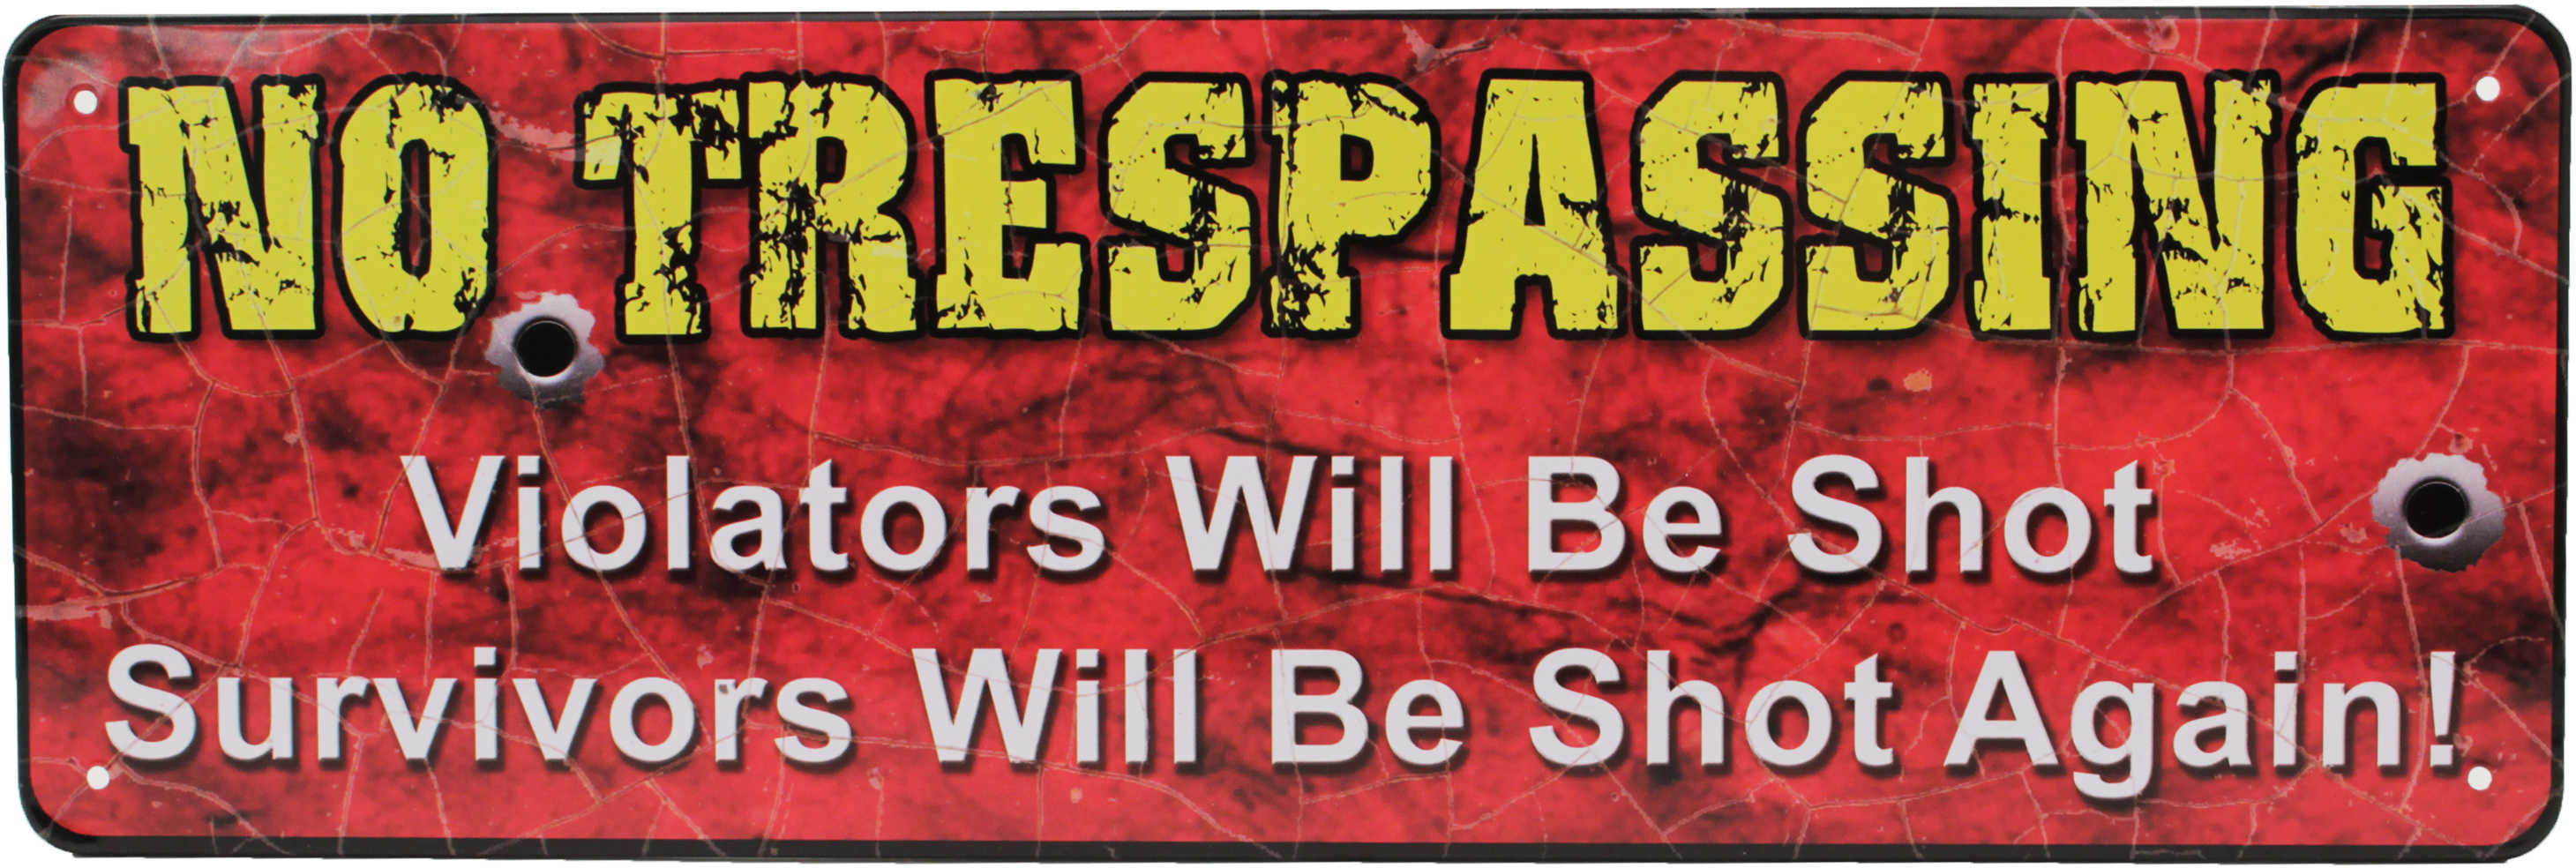 Rivers Edge Products 10.5" x 3.5" Tin Sign No Trespassing 1406